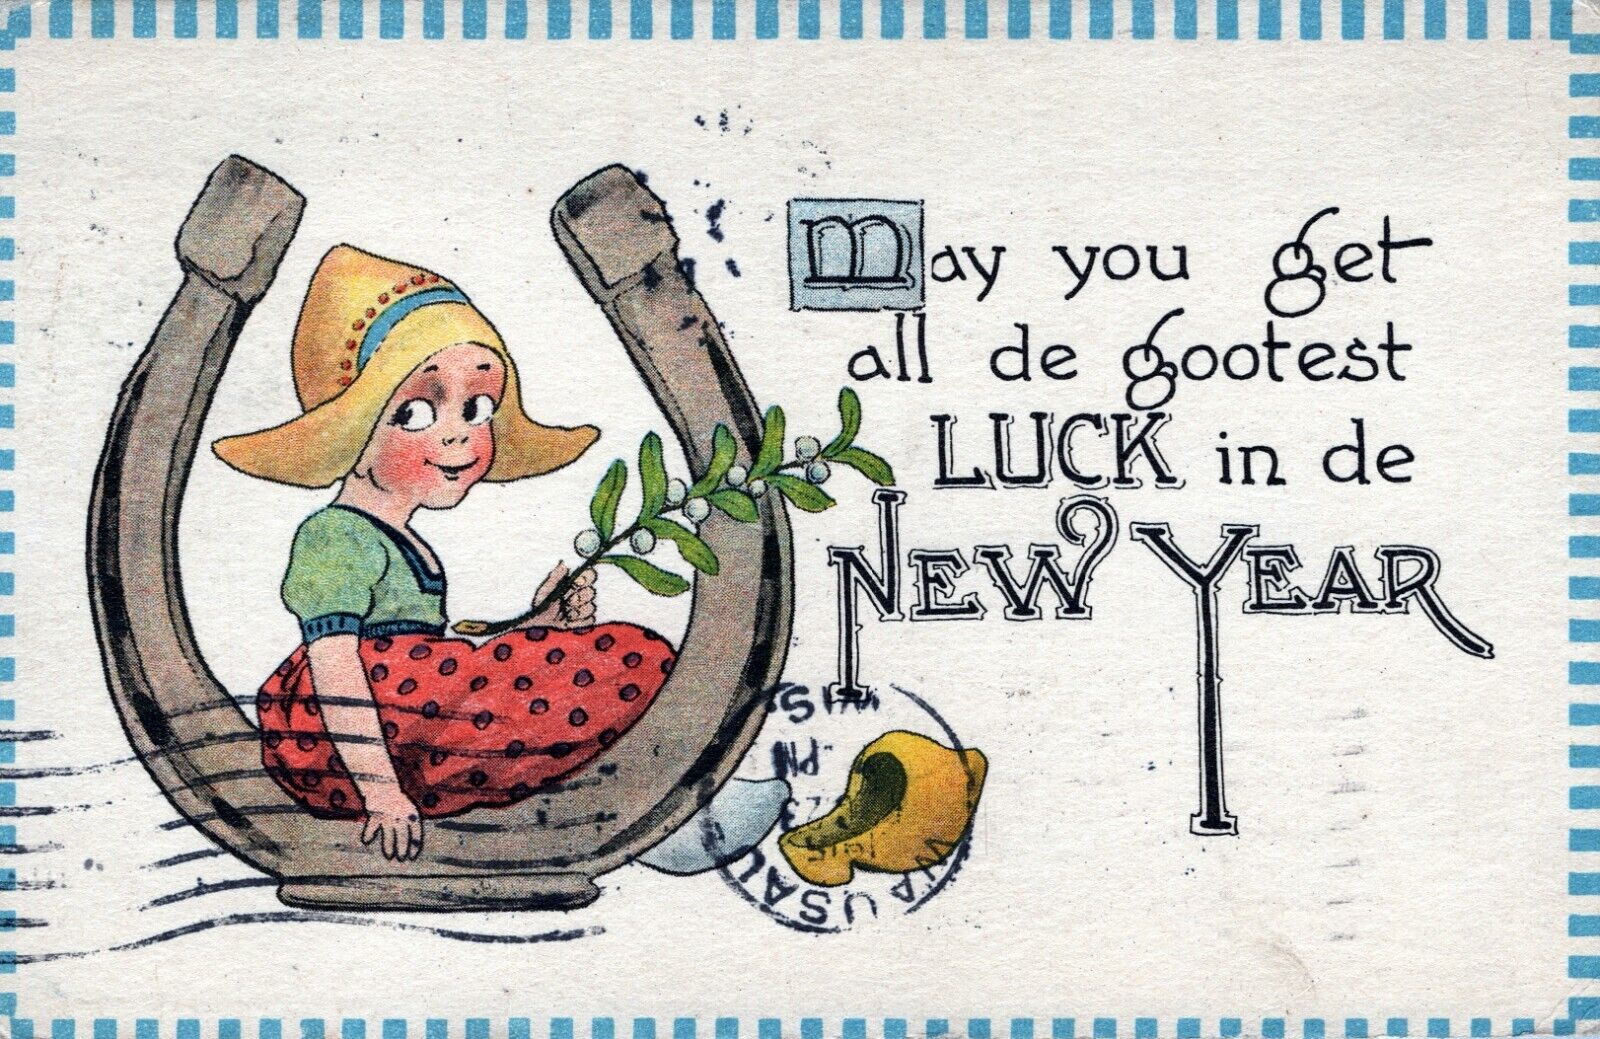 May You Get All De Gootest Luck In De New Year. Posted Humor & Comic Postcard